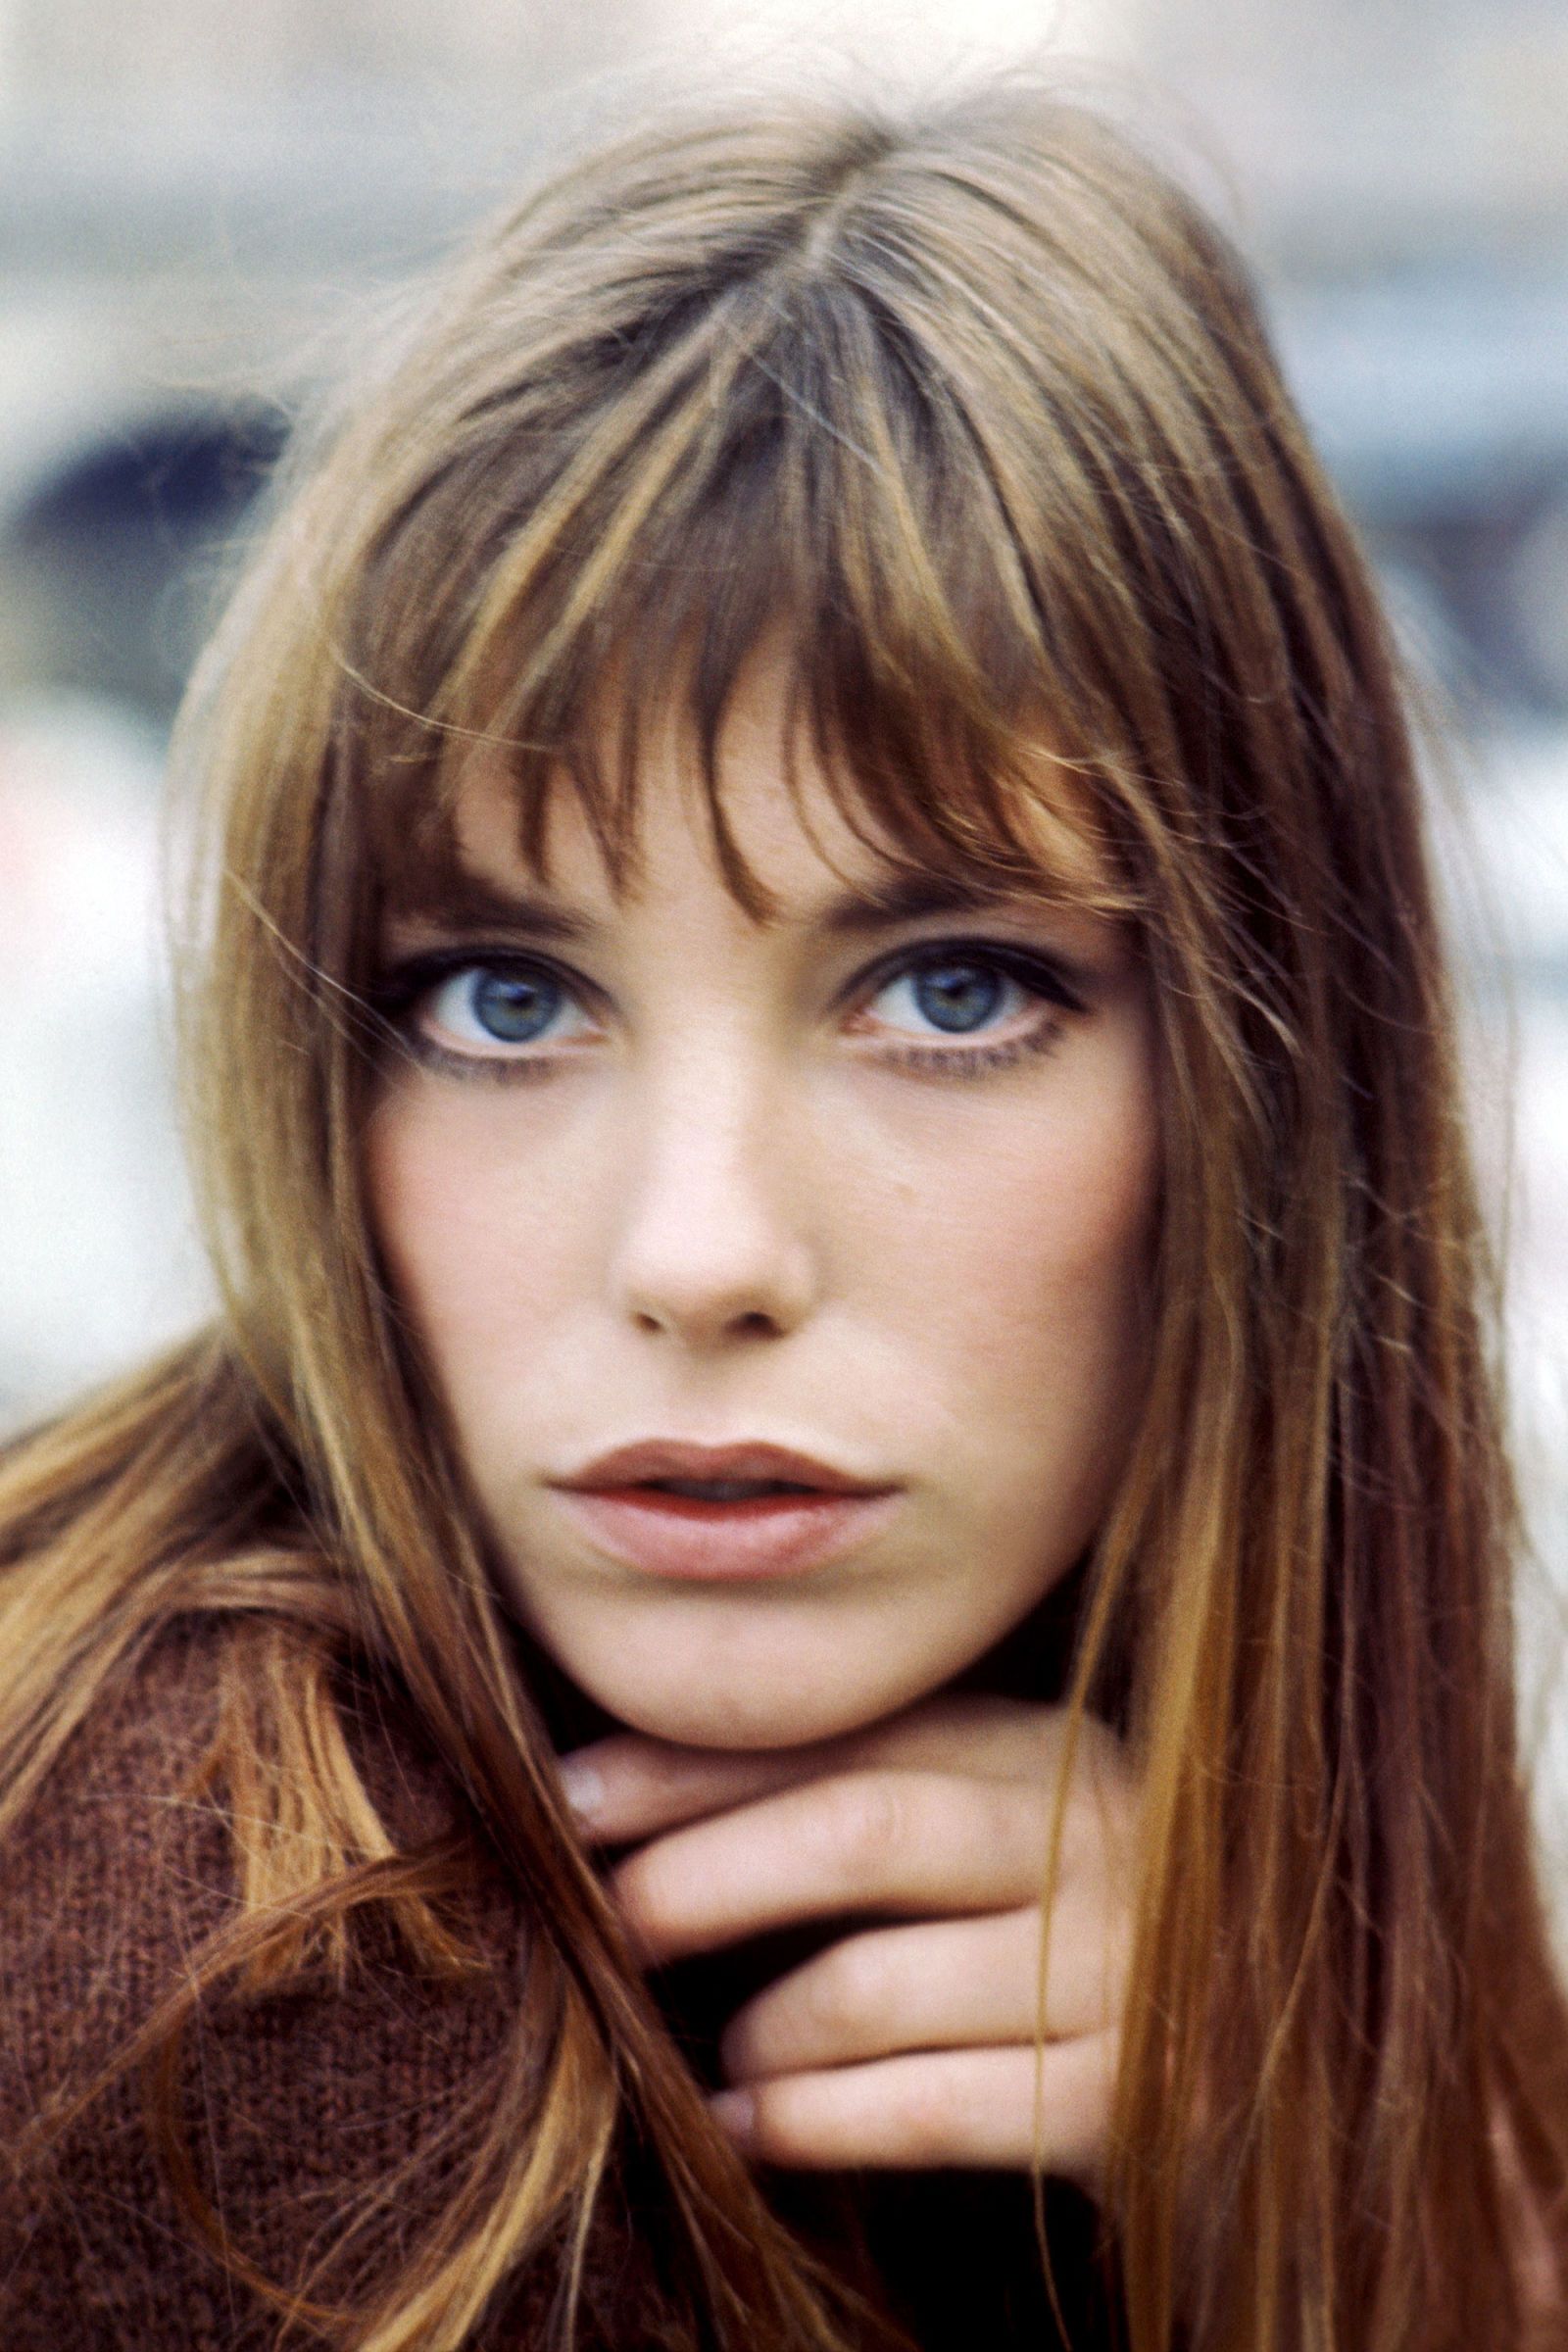 The 8 Most Popular Types of Bangs